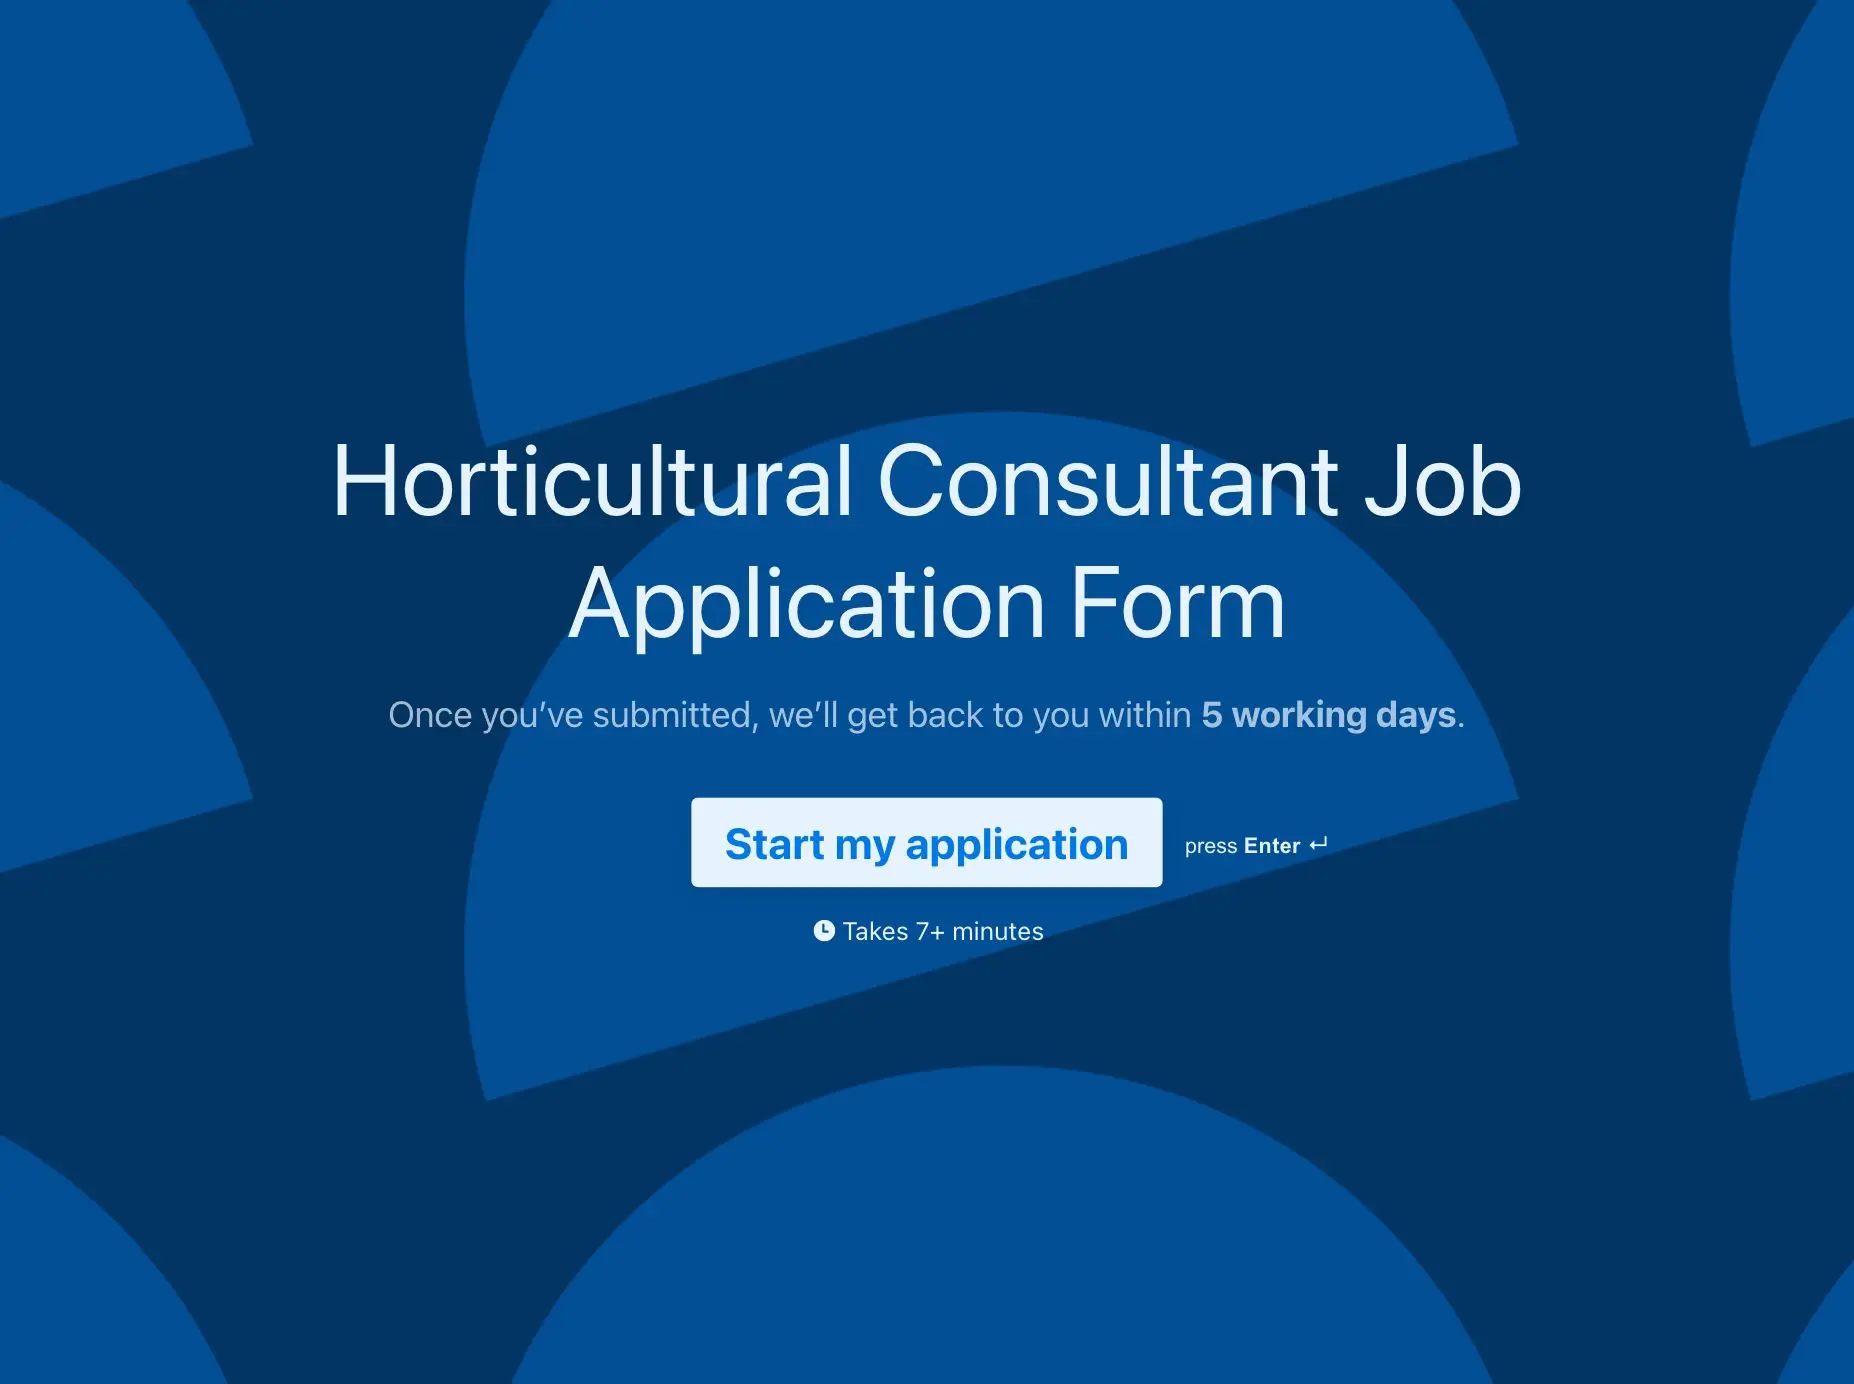 Horticultural Consultant Job Application Form Template Hero